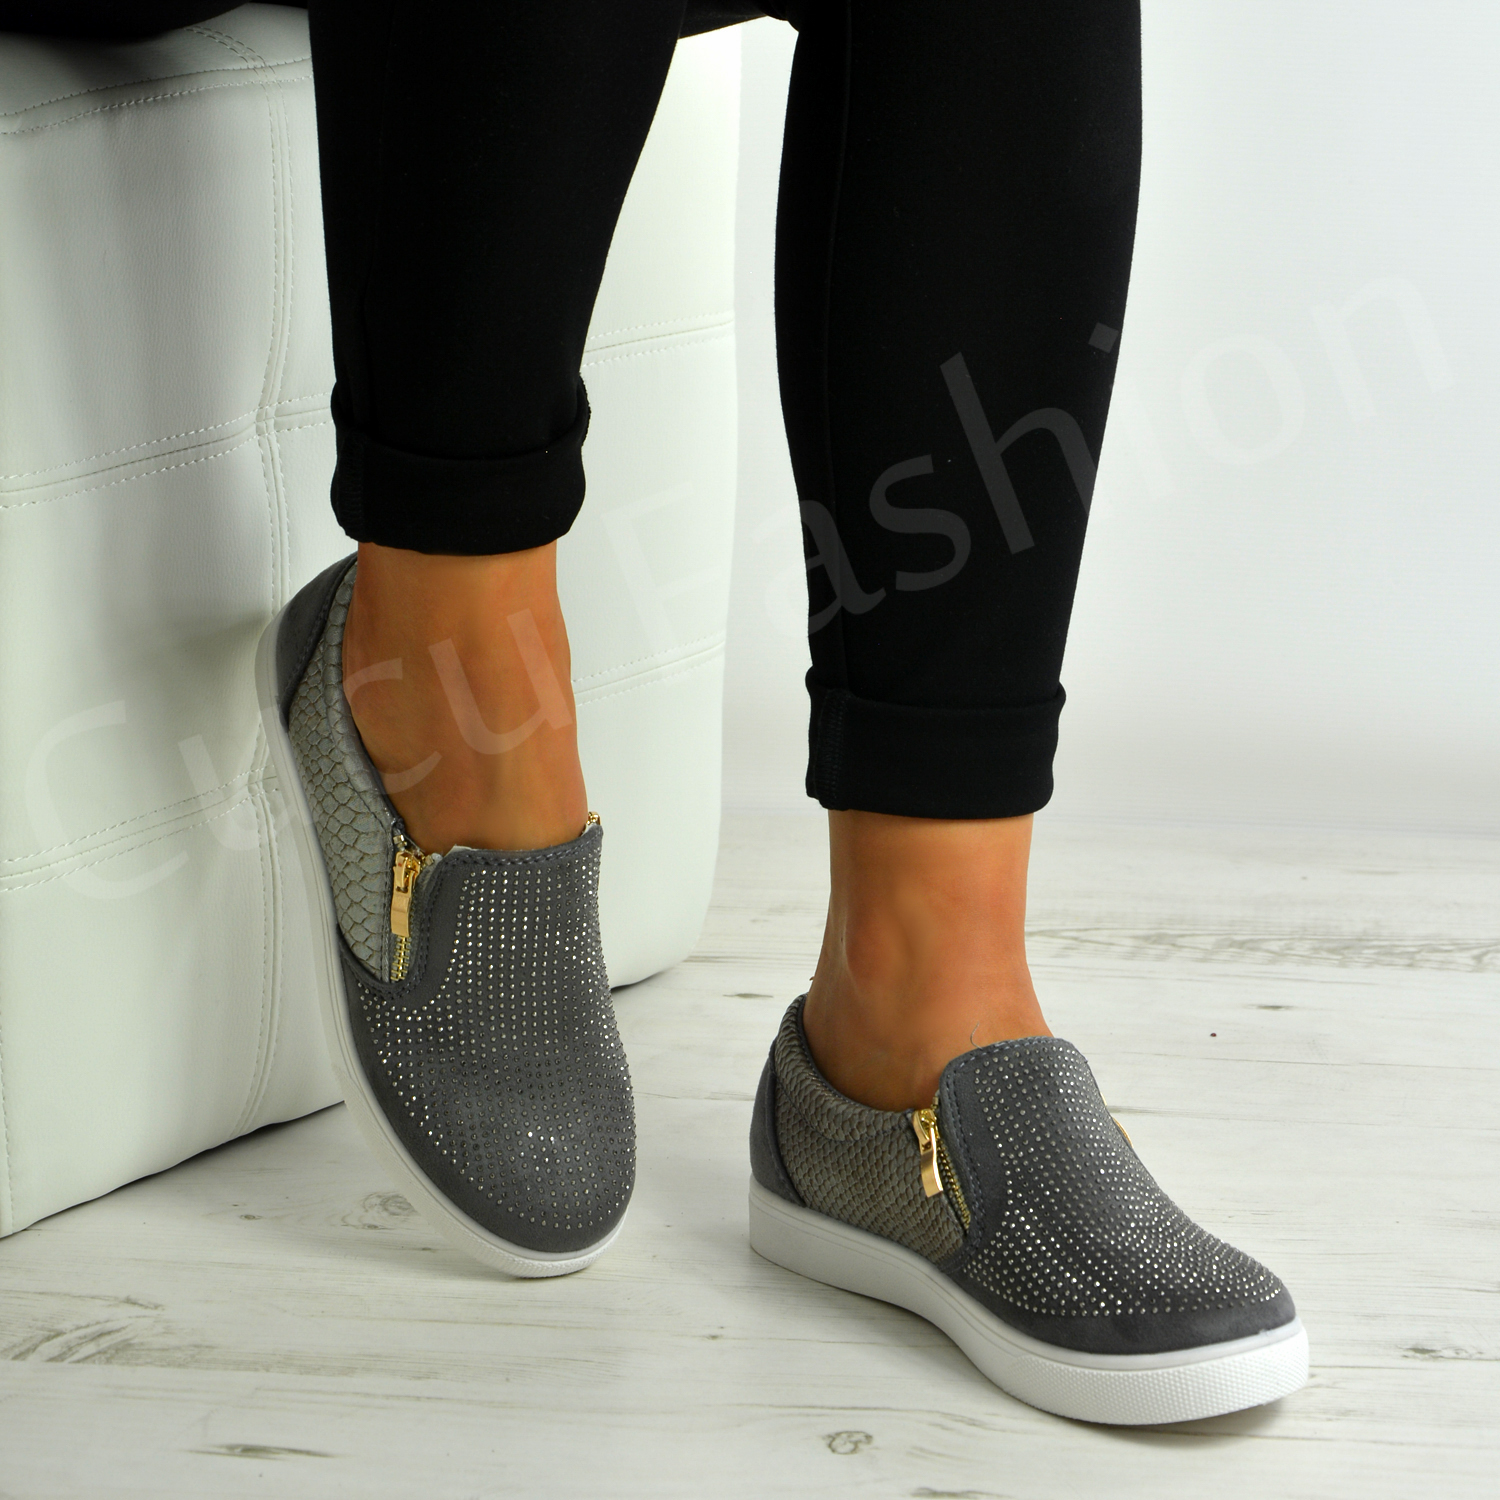 NEW WOMENS LADIES Slip On Studded Flat Trainers Zip Shoes Size Uk 3-8 £ ...